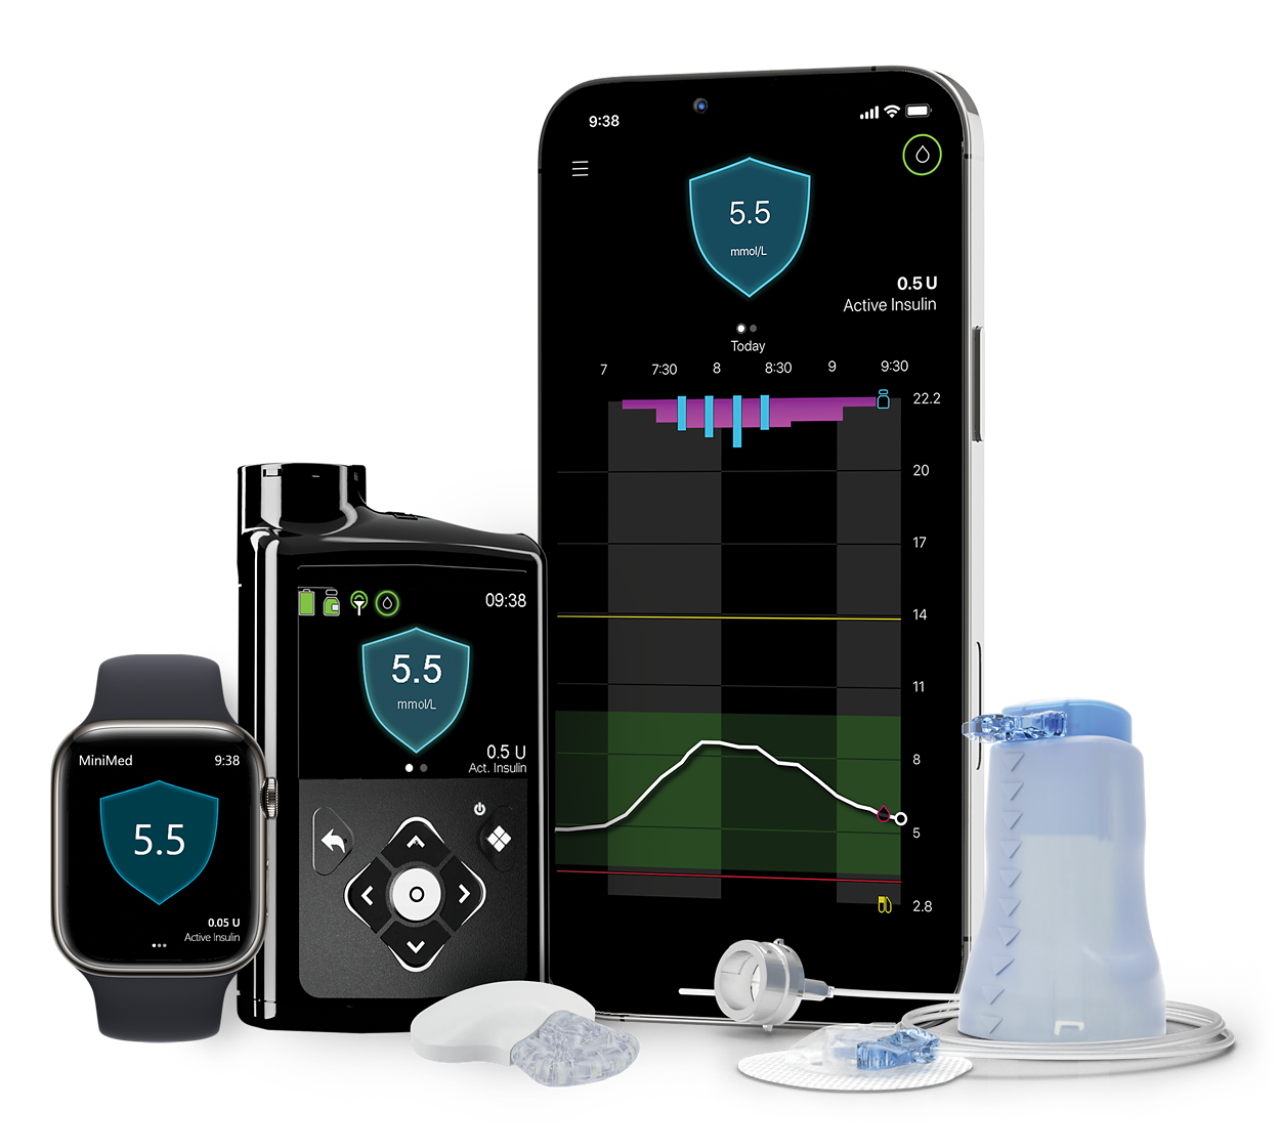 Image of Medtronic Extended infusion set next to Medtronic MiniMed 780G and apple watch